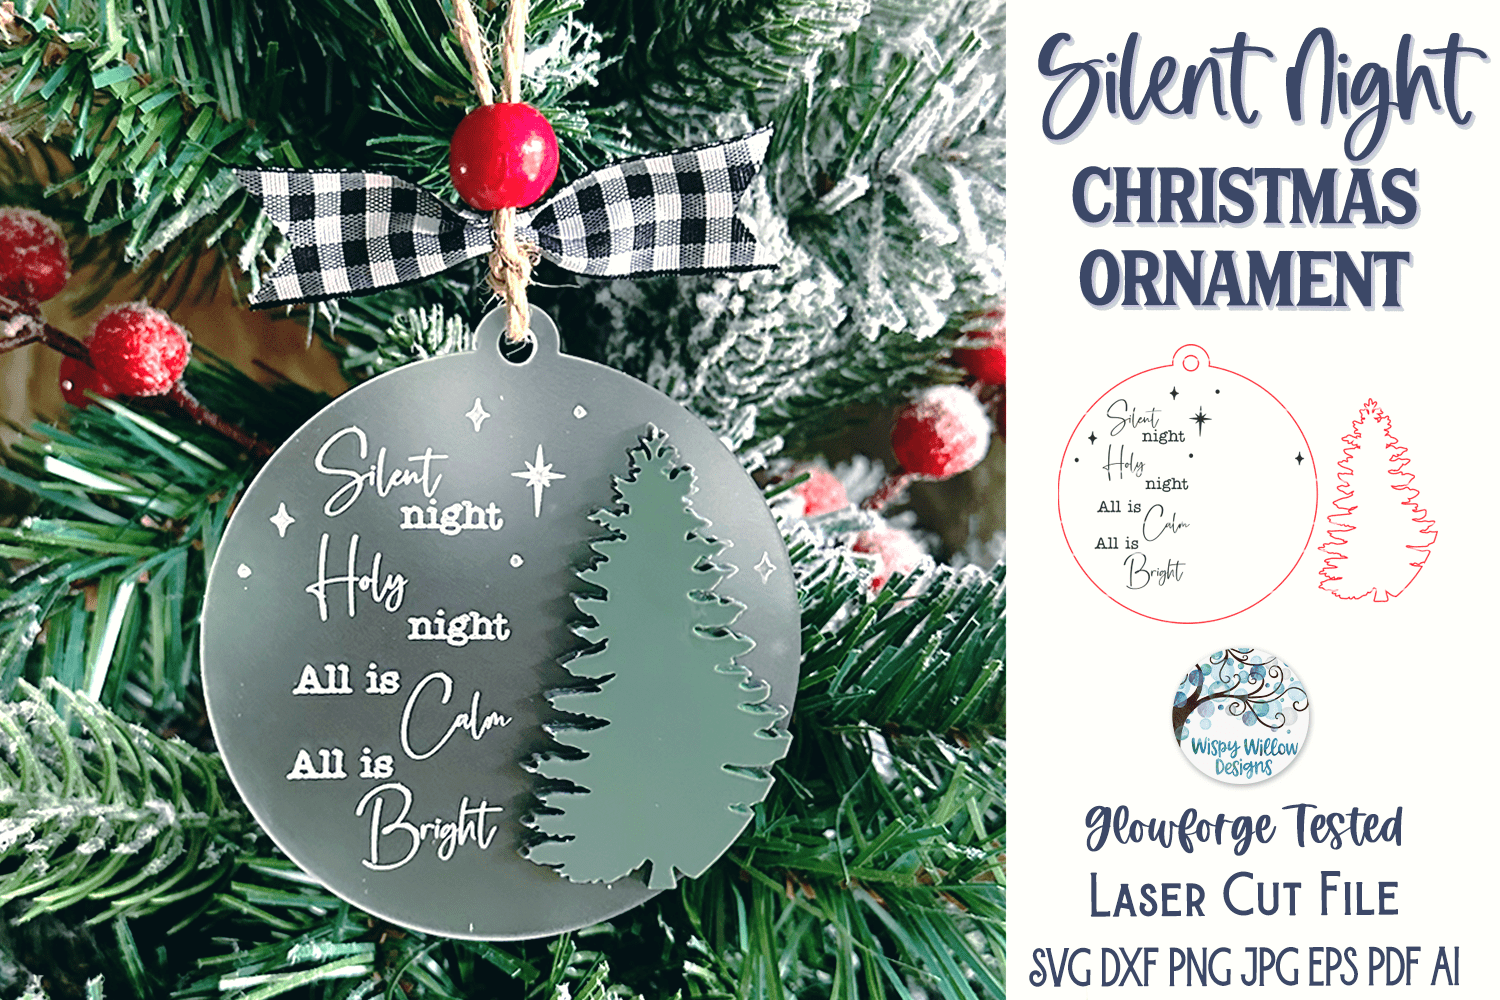 Silent Night Christmas Ornament for Glowforge or Laser Cutter Wispy Willow Designs Company